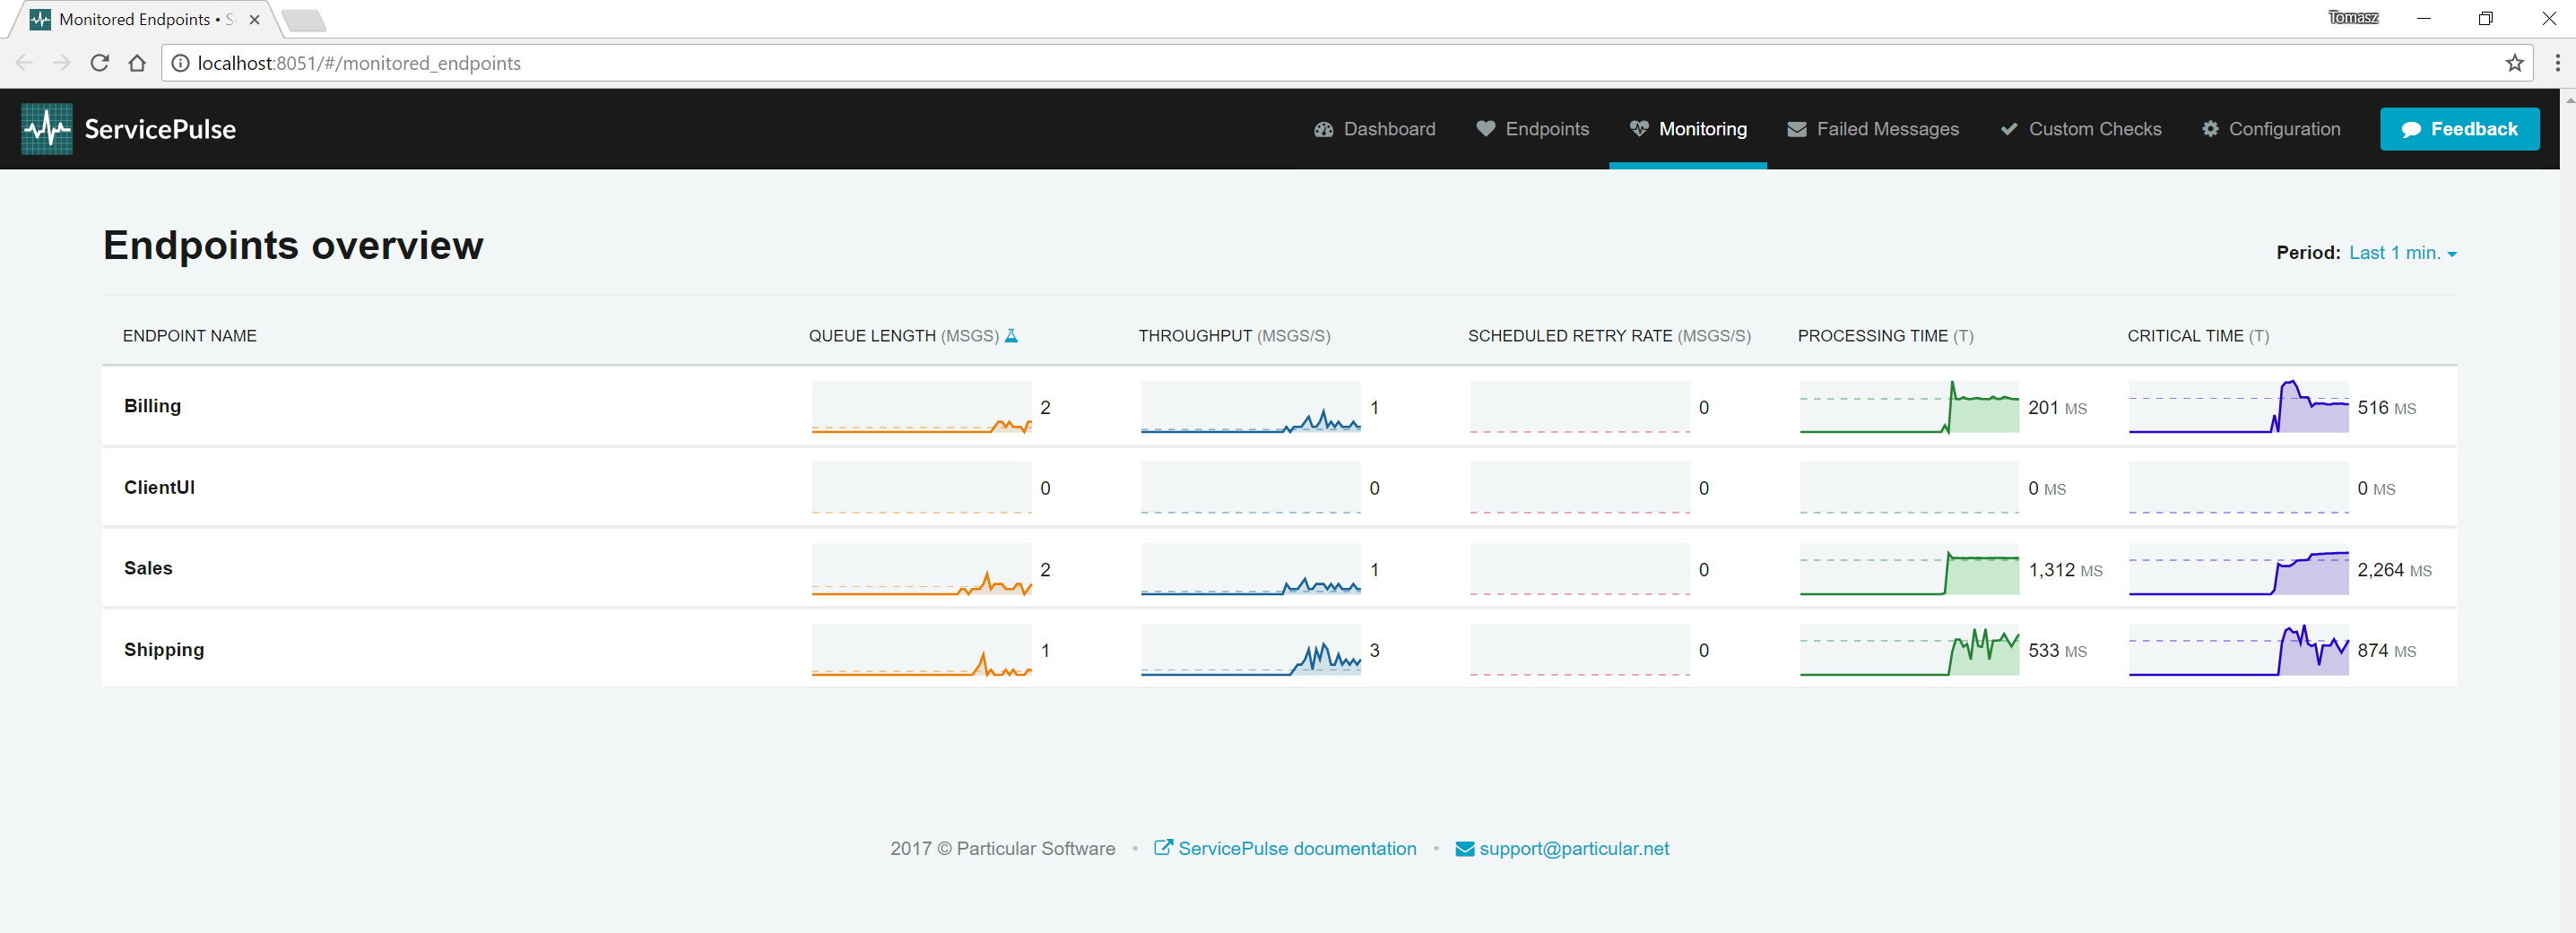 ServicePulse - Monitoring Tab - With Endpoints